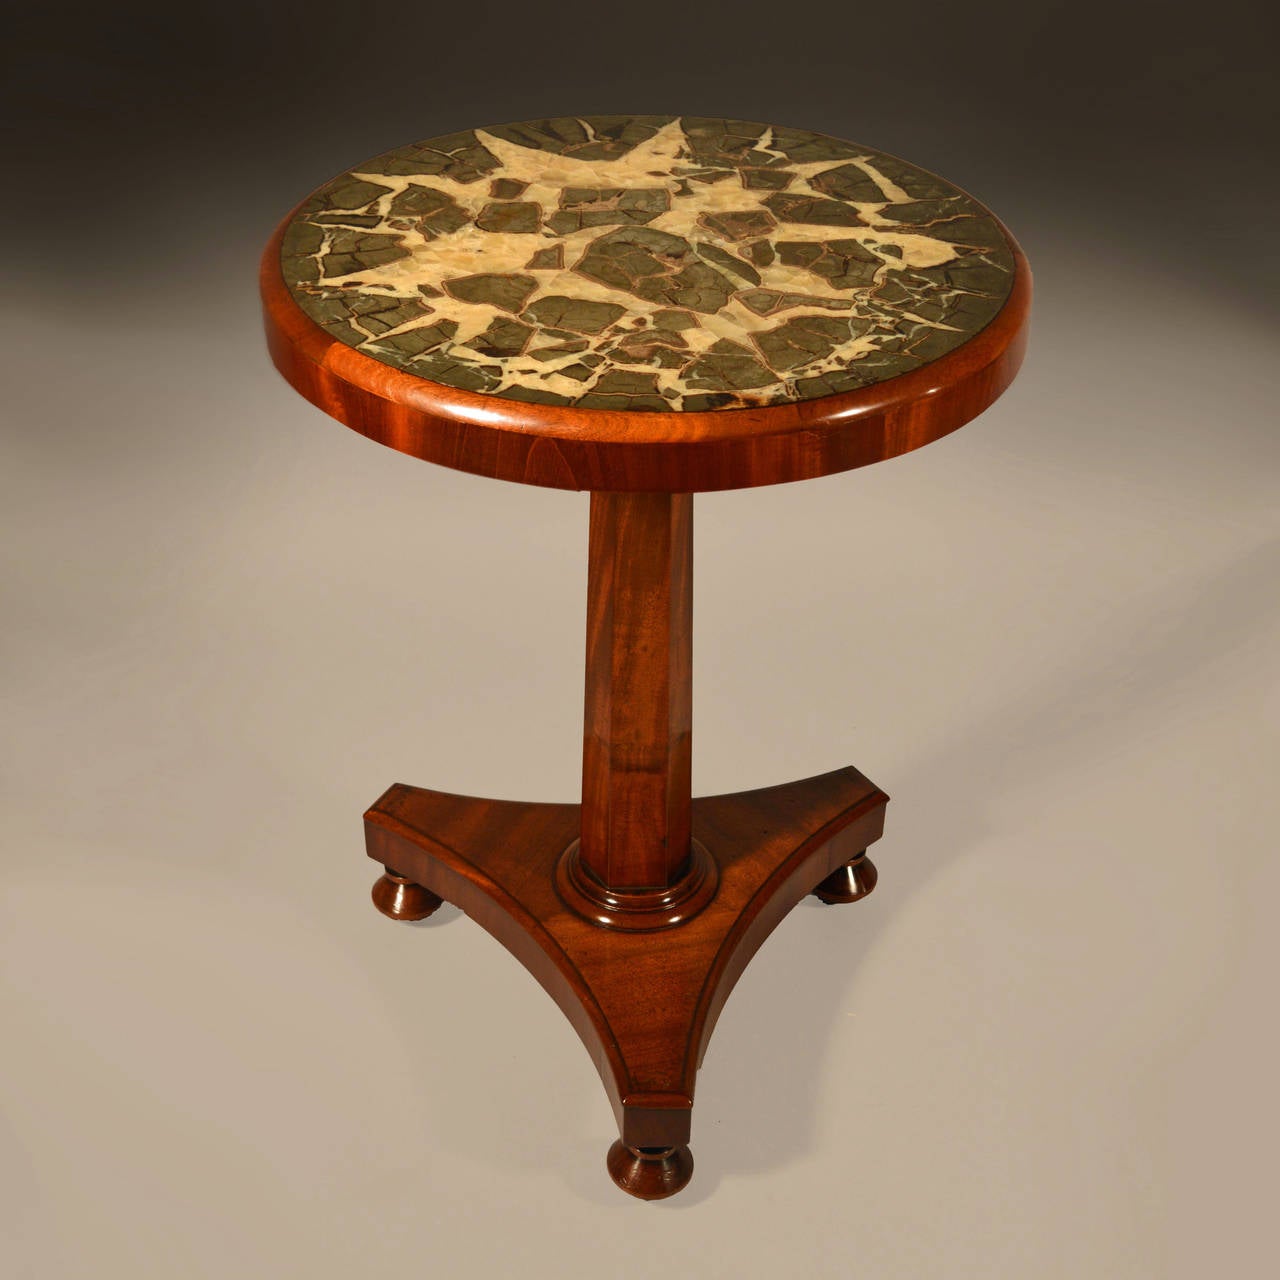 A fine mid 19th century mahogany occasional table, the top inset with a large fragment of turtle stone with turned pedestal and tripod base.